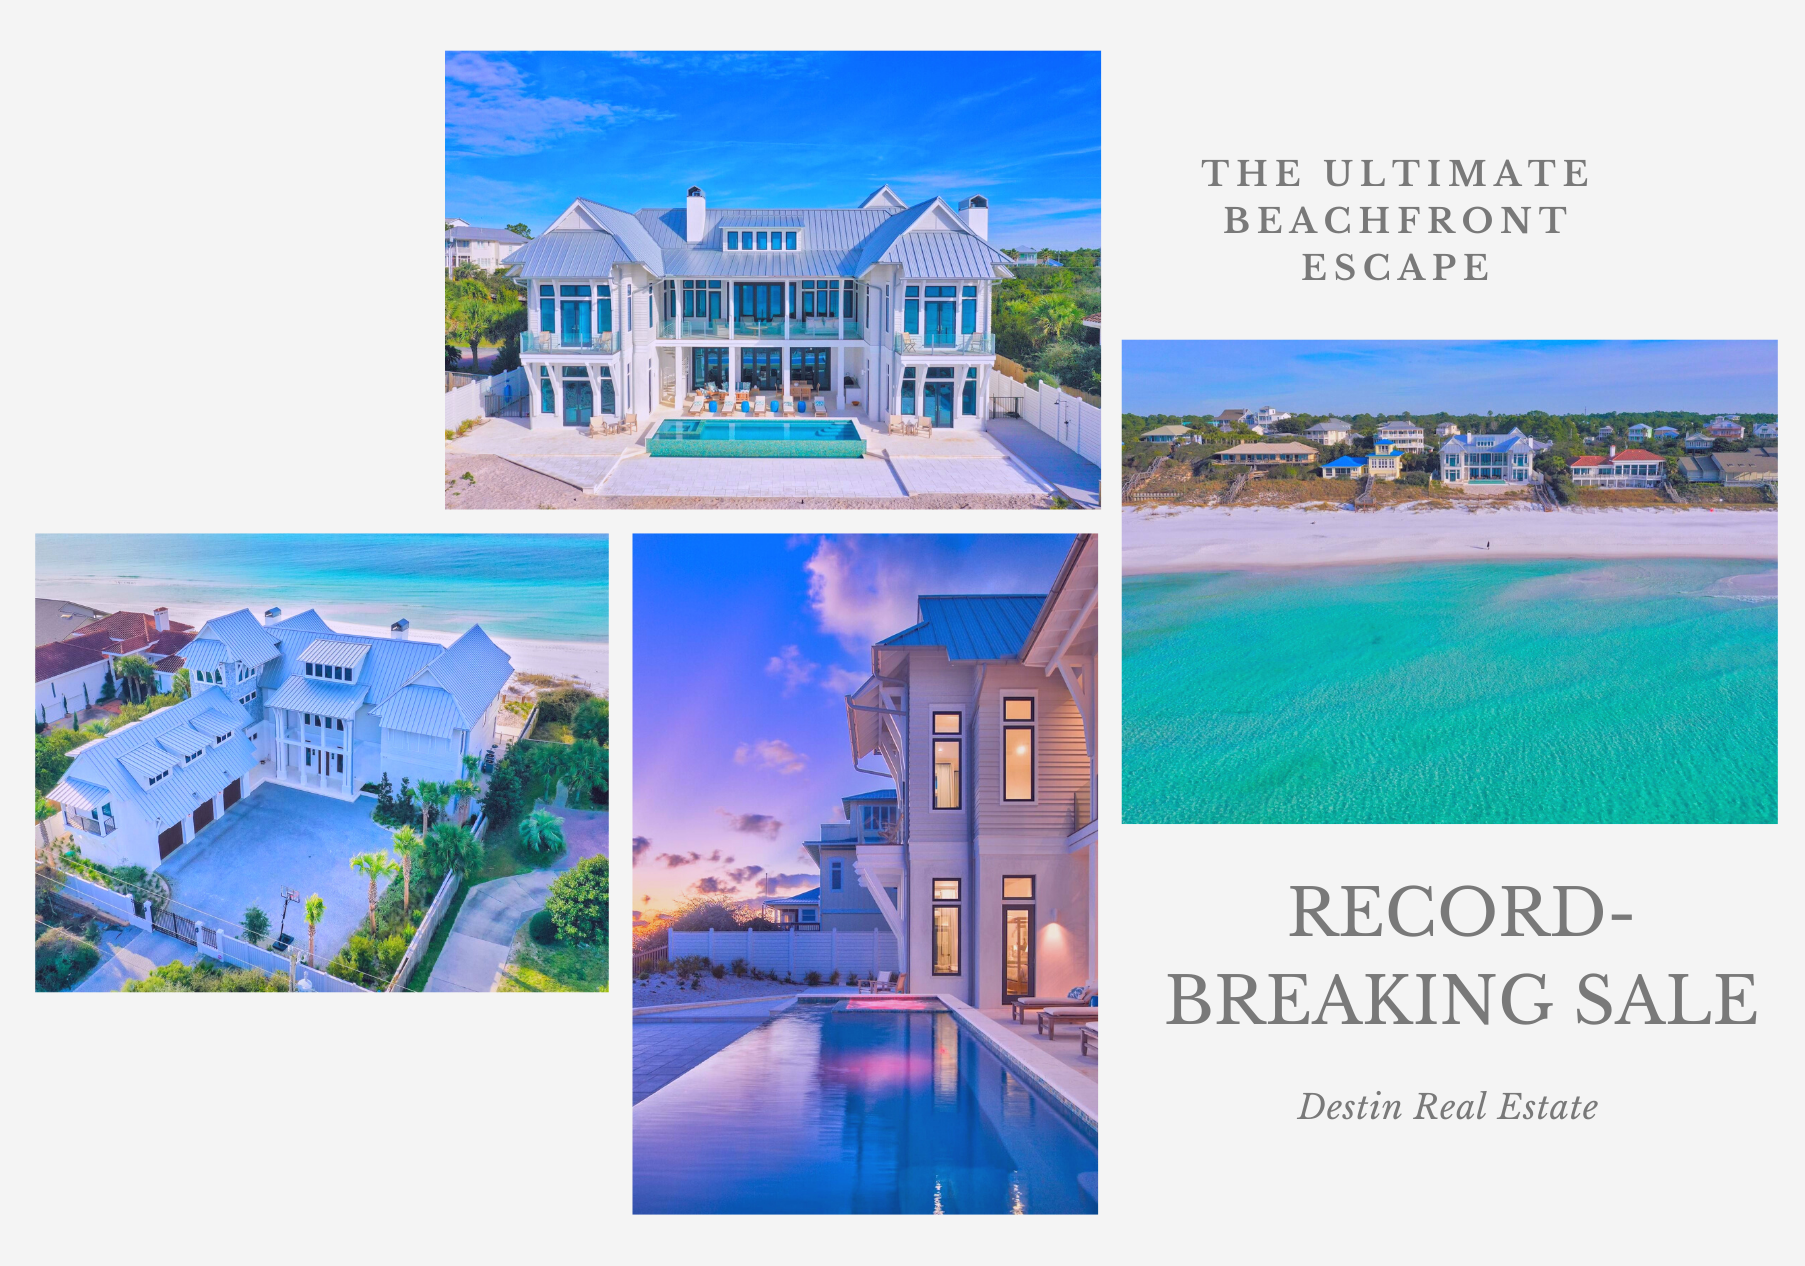 NEWS! Record breaking gulf front home sale in Santa Rosa Beach, Florida